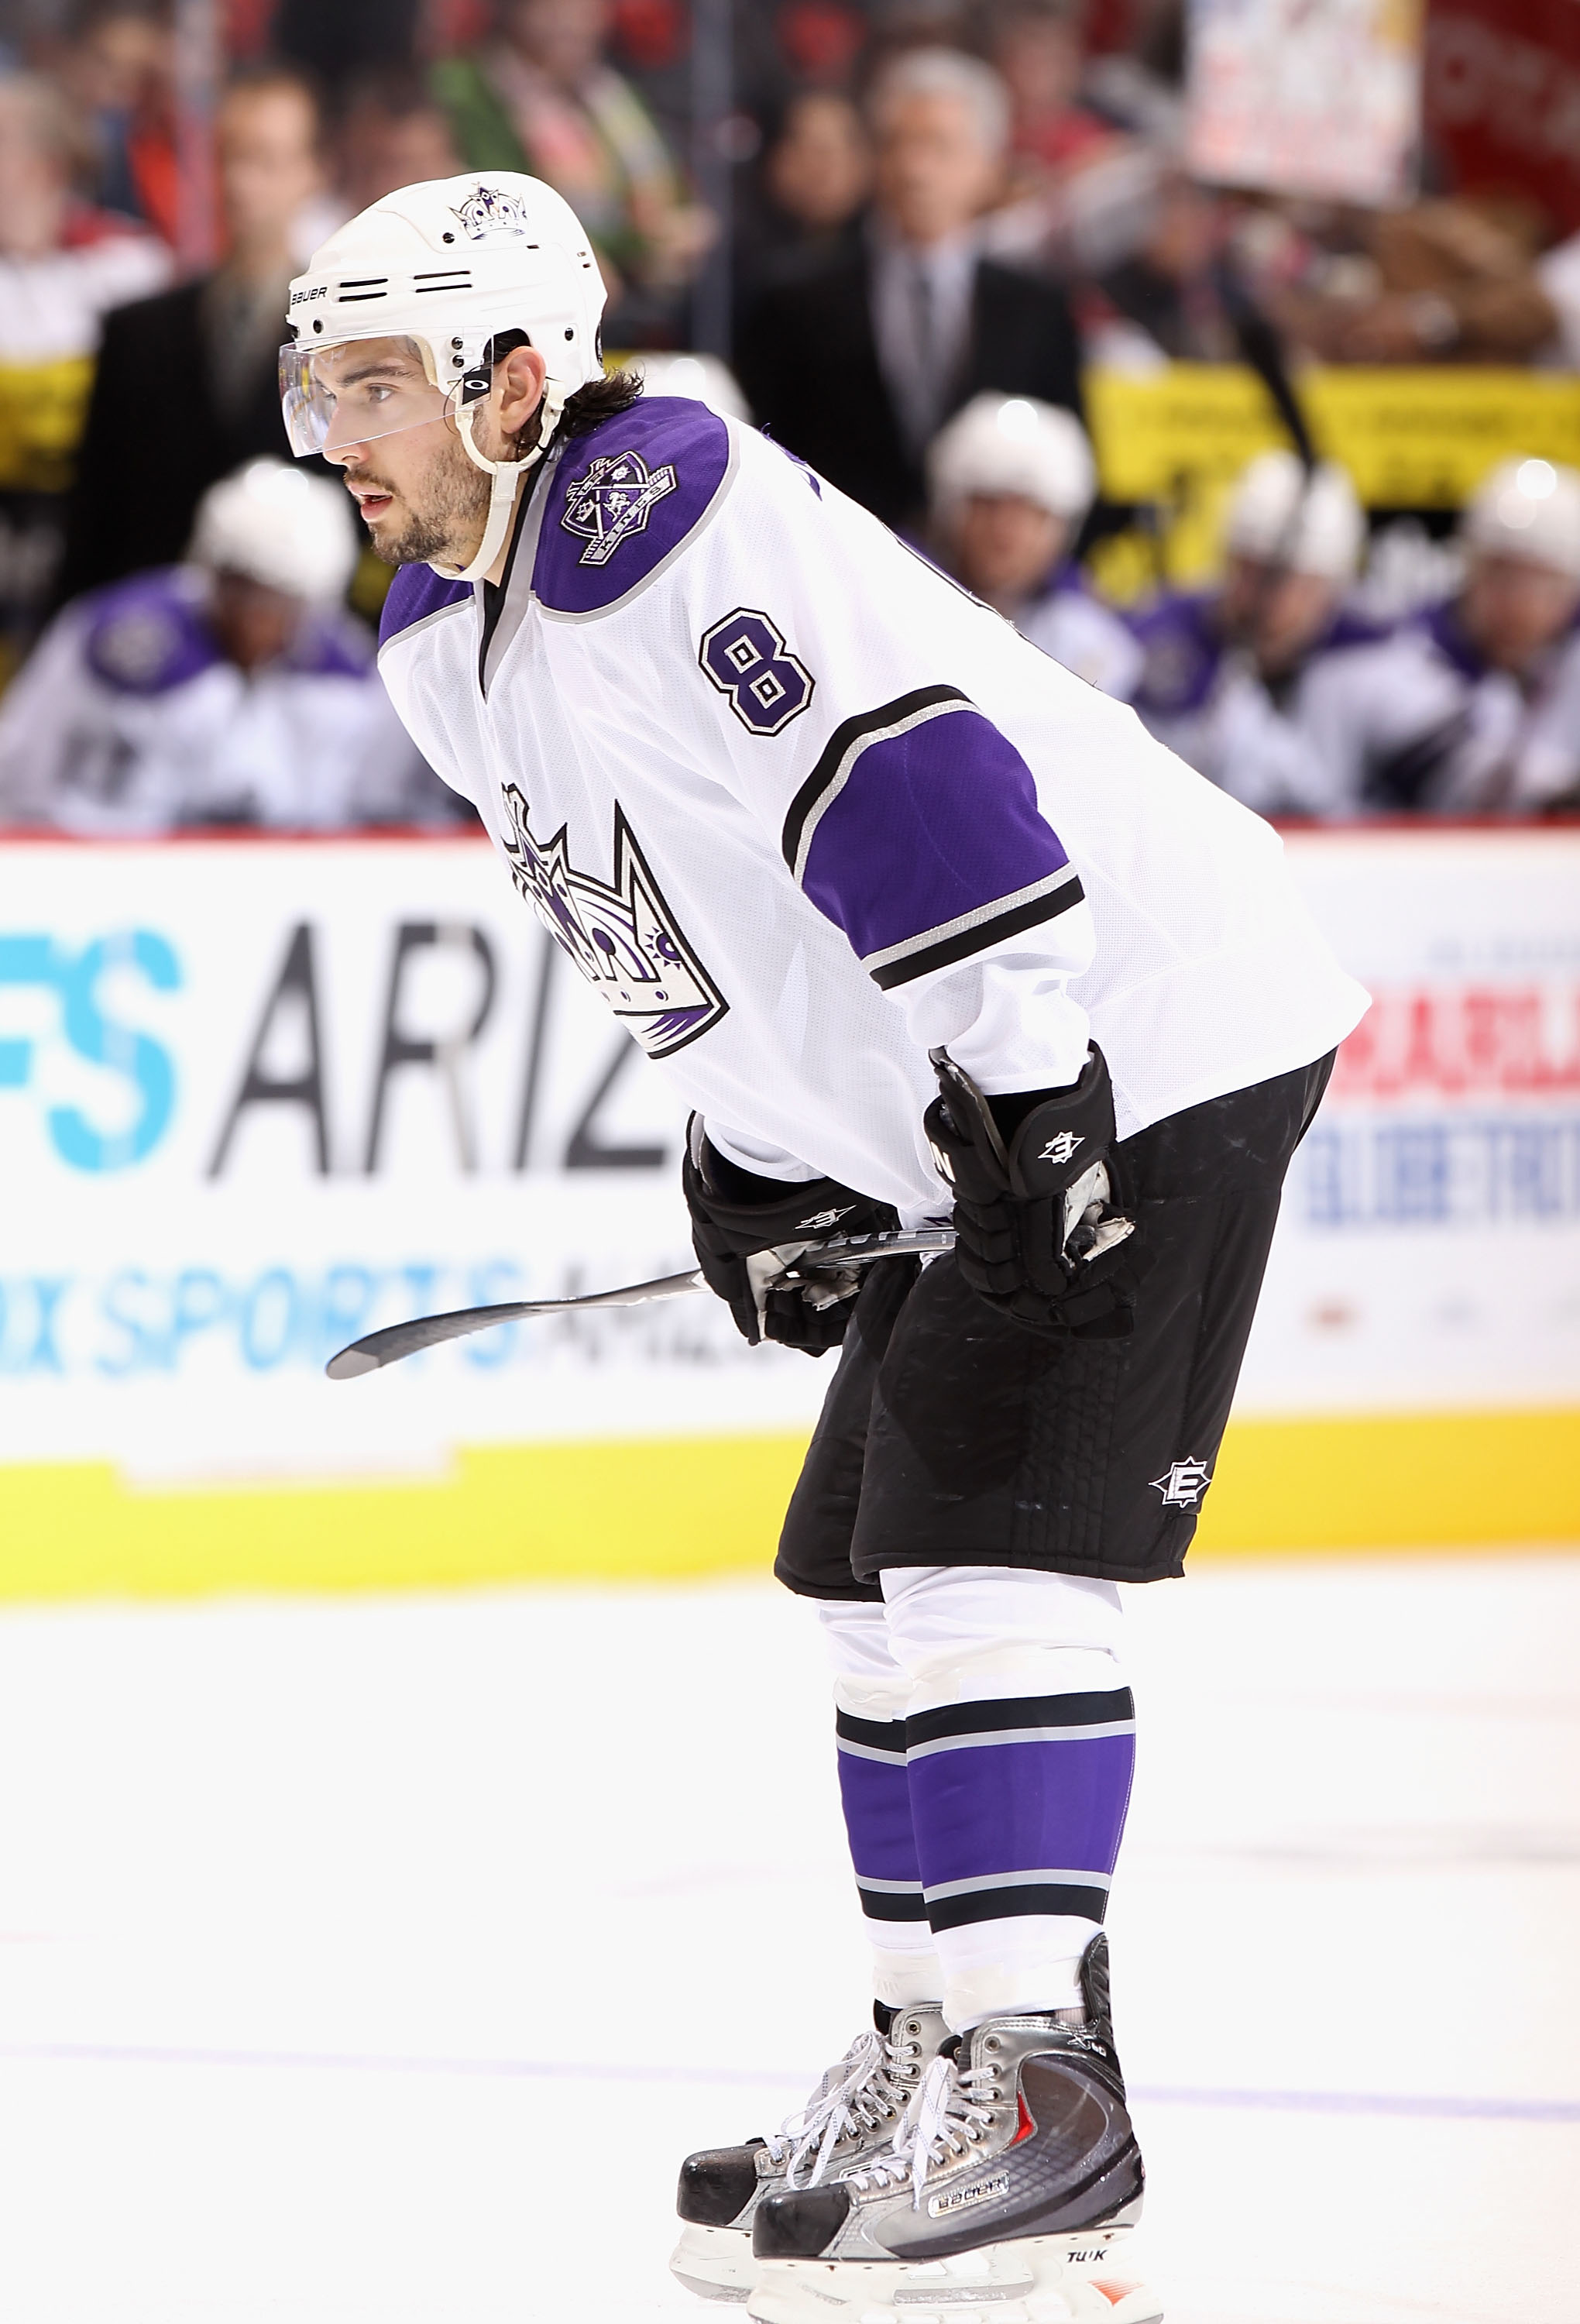 GLENDALE, AZ - DECEMBER 29:  Drew Doughty #8 of the Los Angeles Kings  during the NHL game against the Phoenix Coyotes at Jobing.com Arena on December 29, 2010 in Glendale, Arizona.  The Coyotes defeated the Kings 6-3.  (Photo by Christian Petersen/Getty